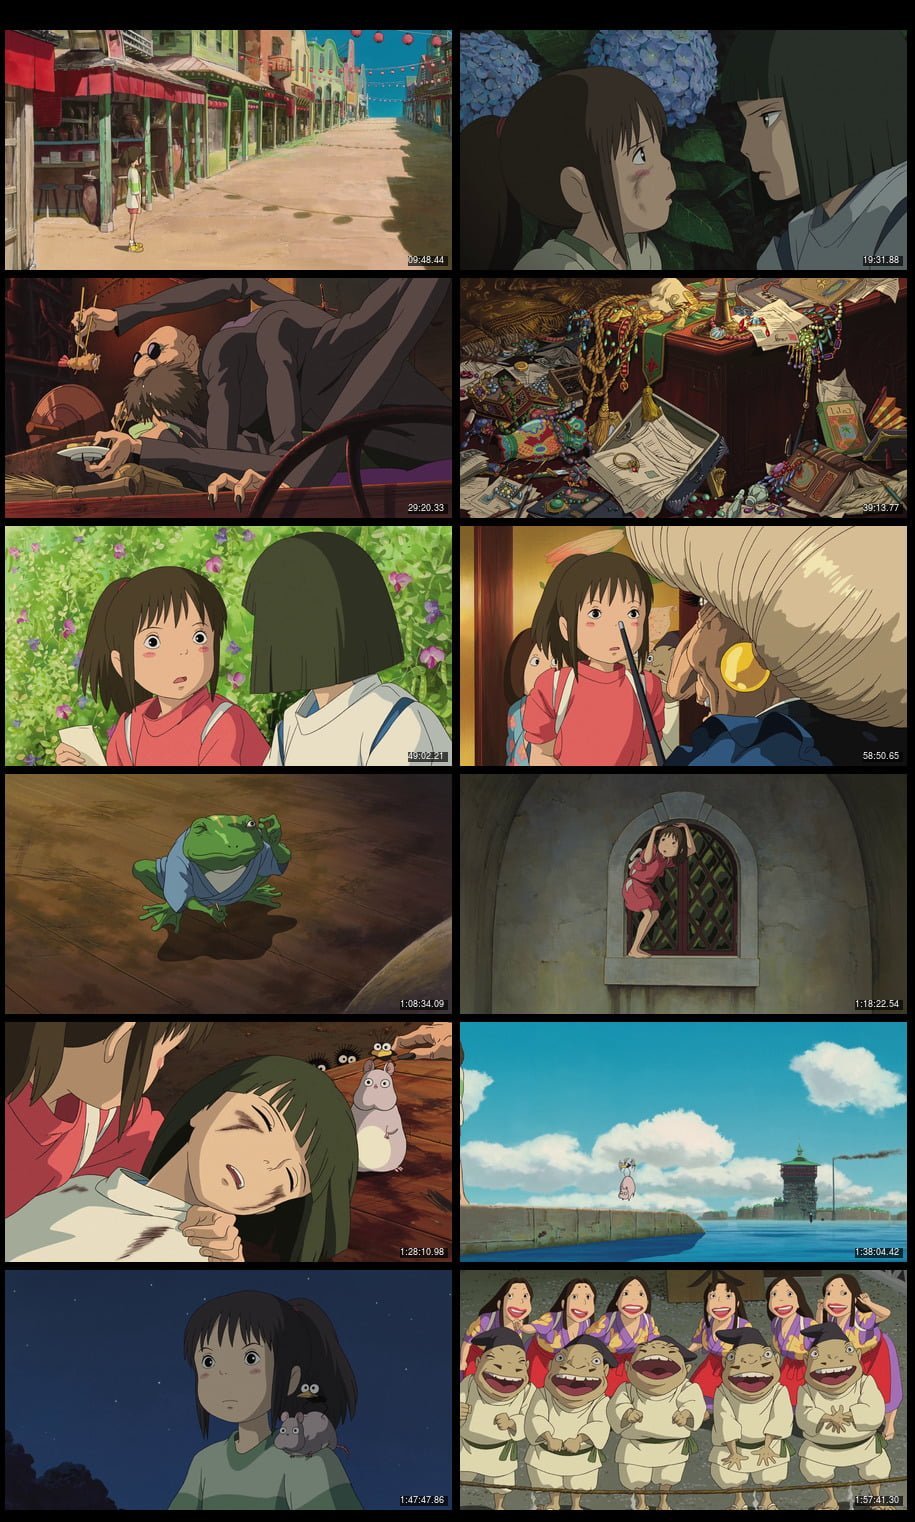 Top Spirited Away English Dub 1080p Aim National Conference 2017 